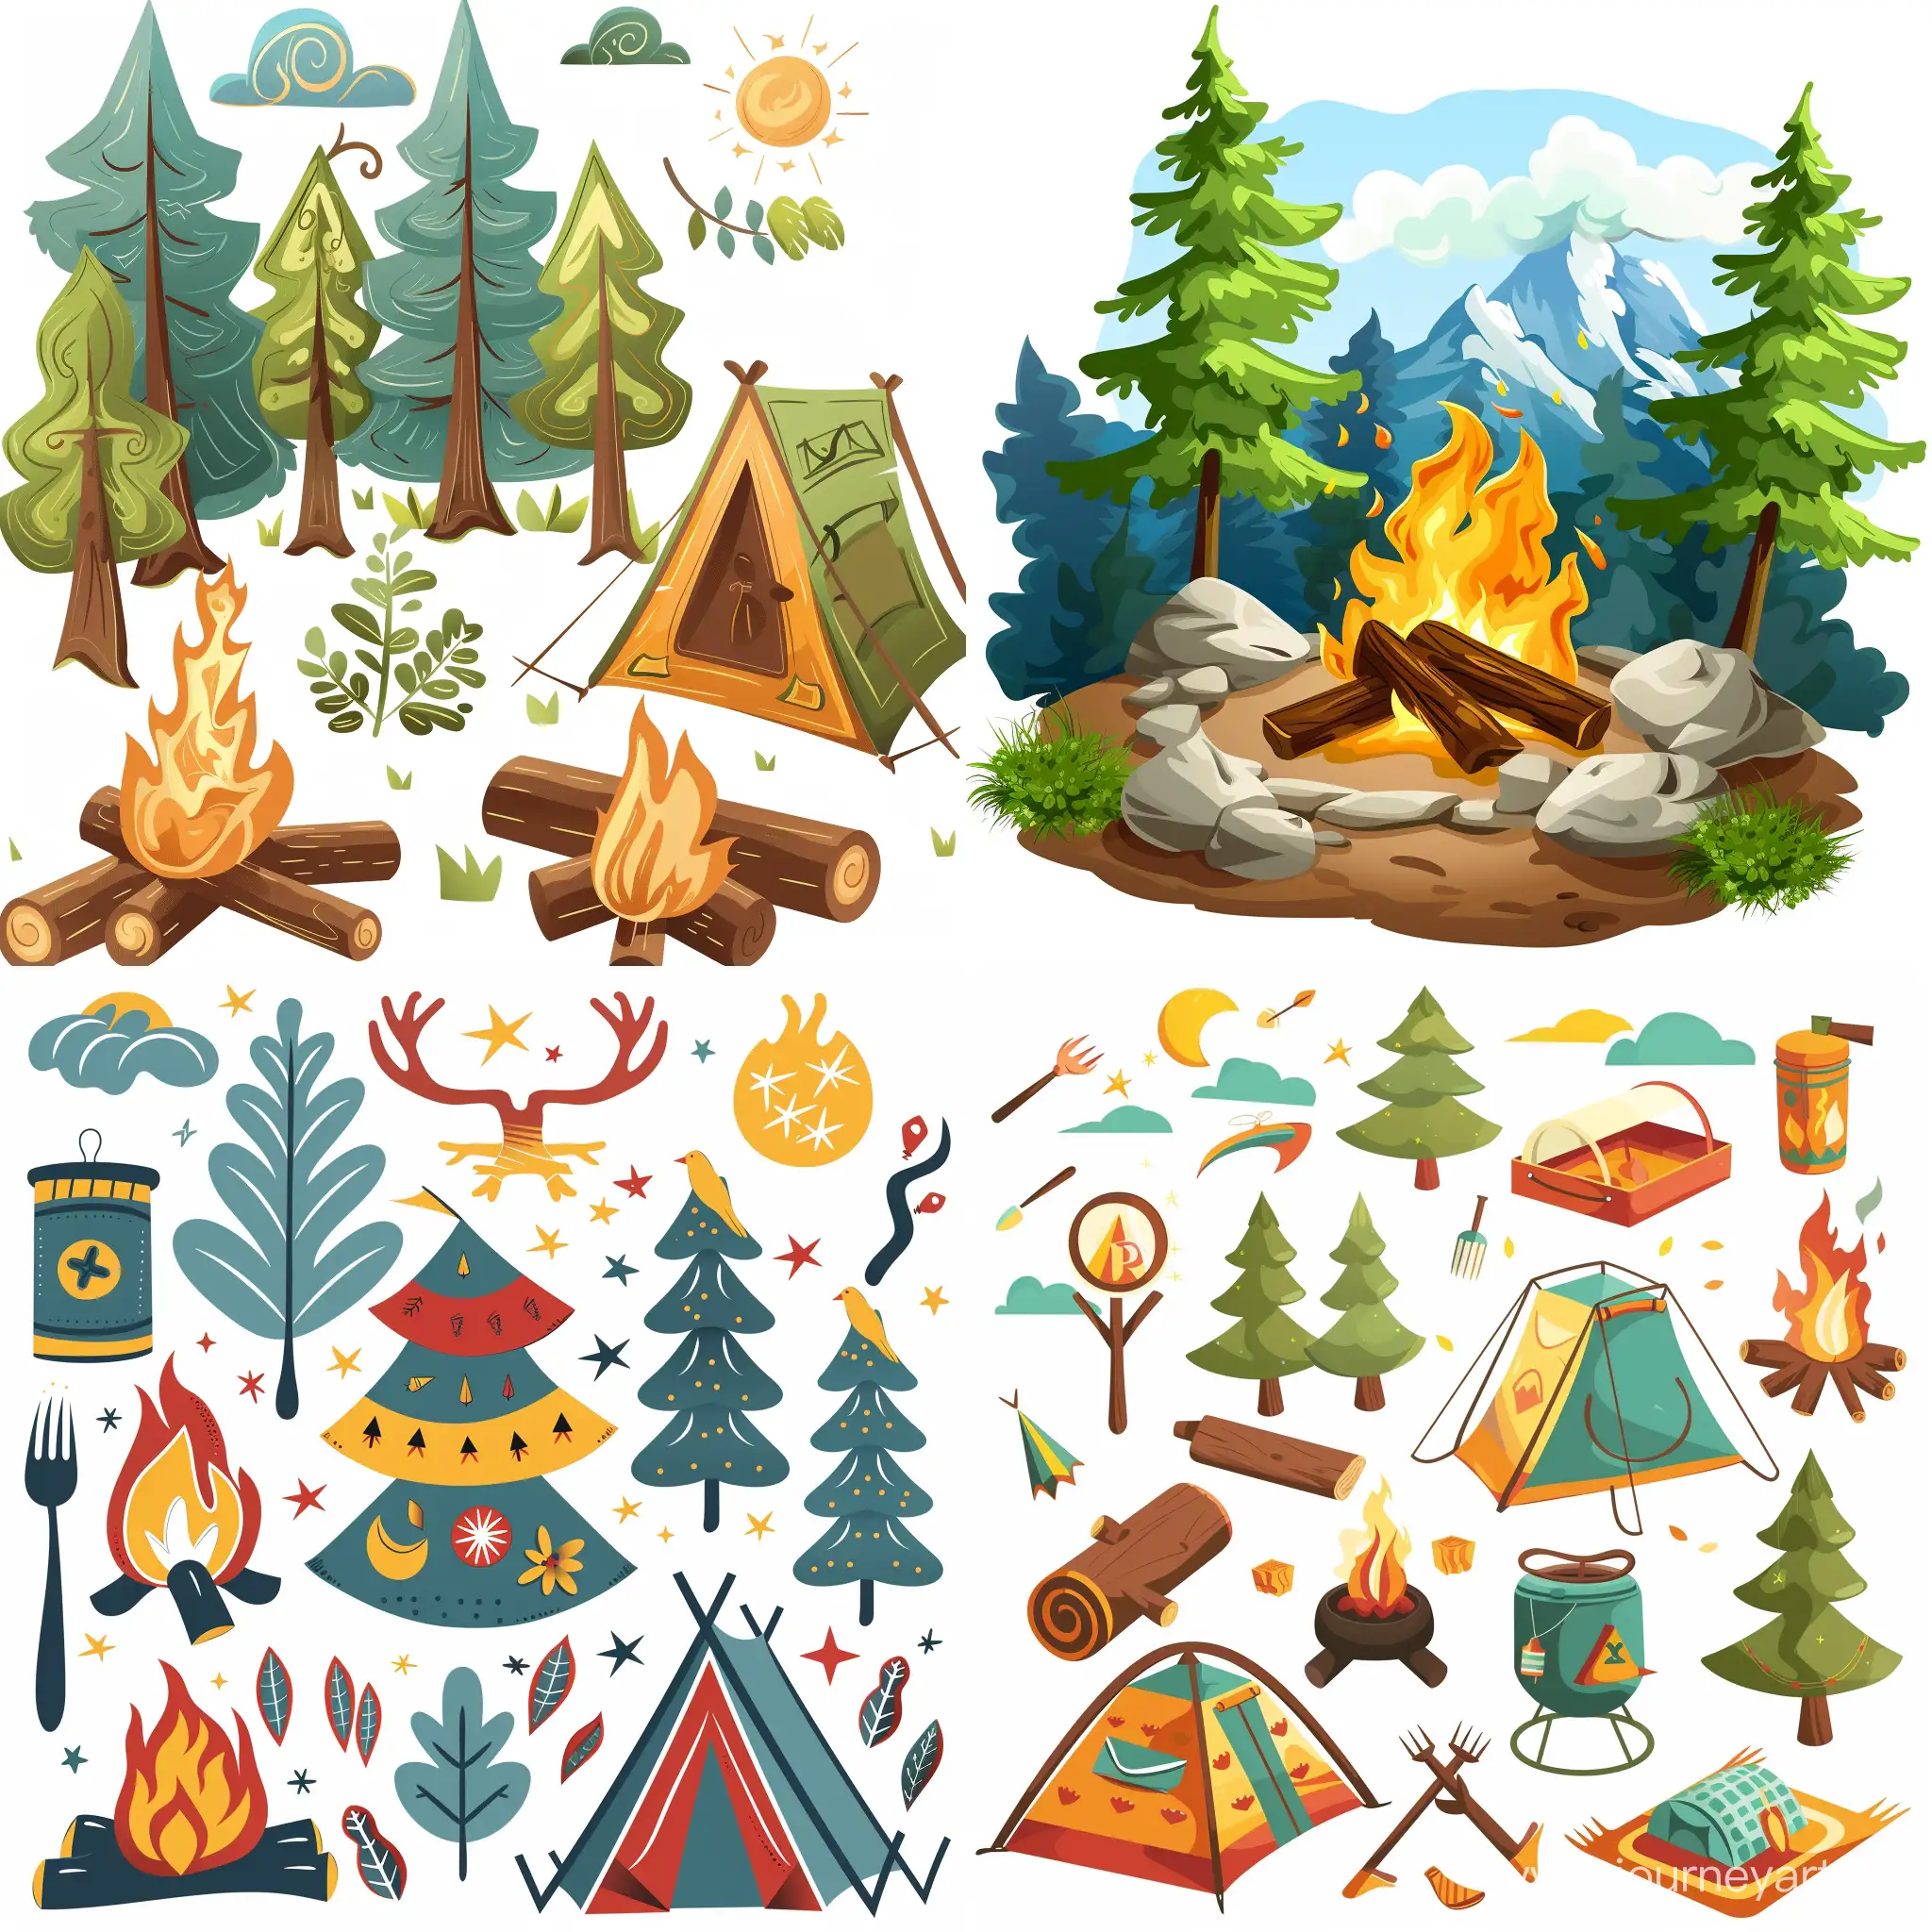 /imagine camping clipart on white background 